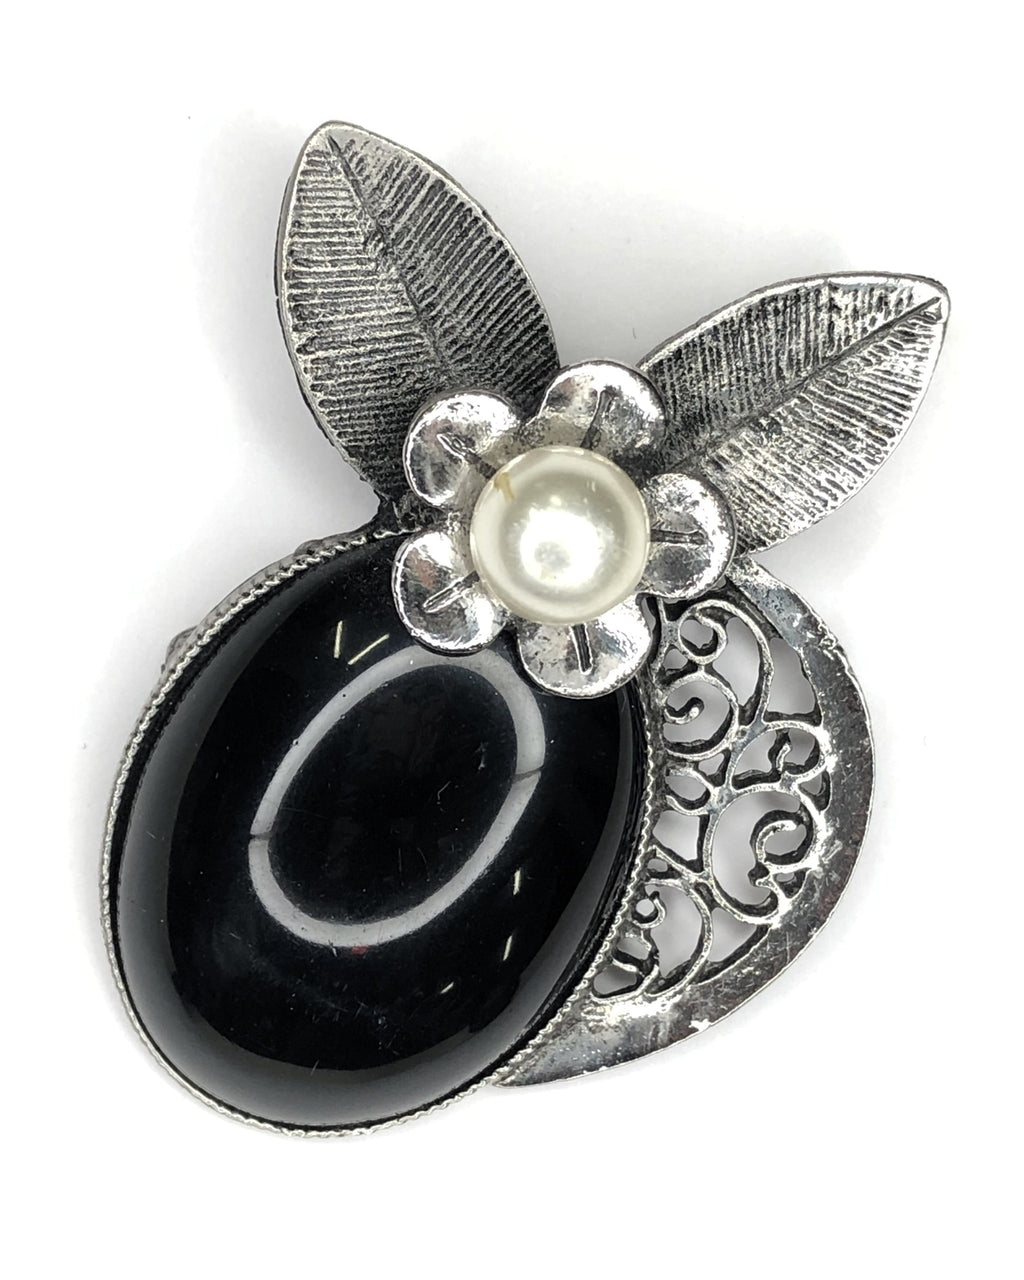 Black stone with pearl flower & silver metal leaves brooch at erika